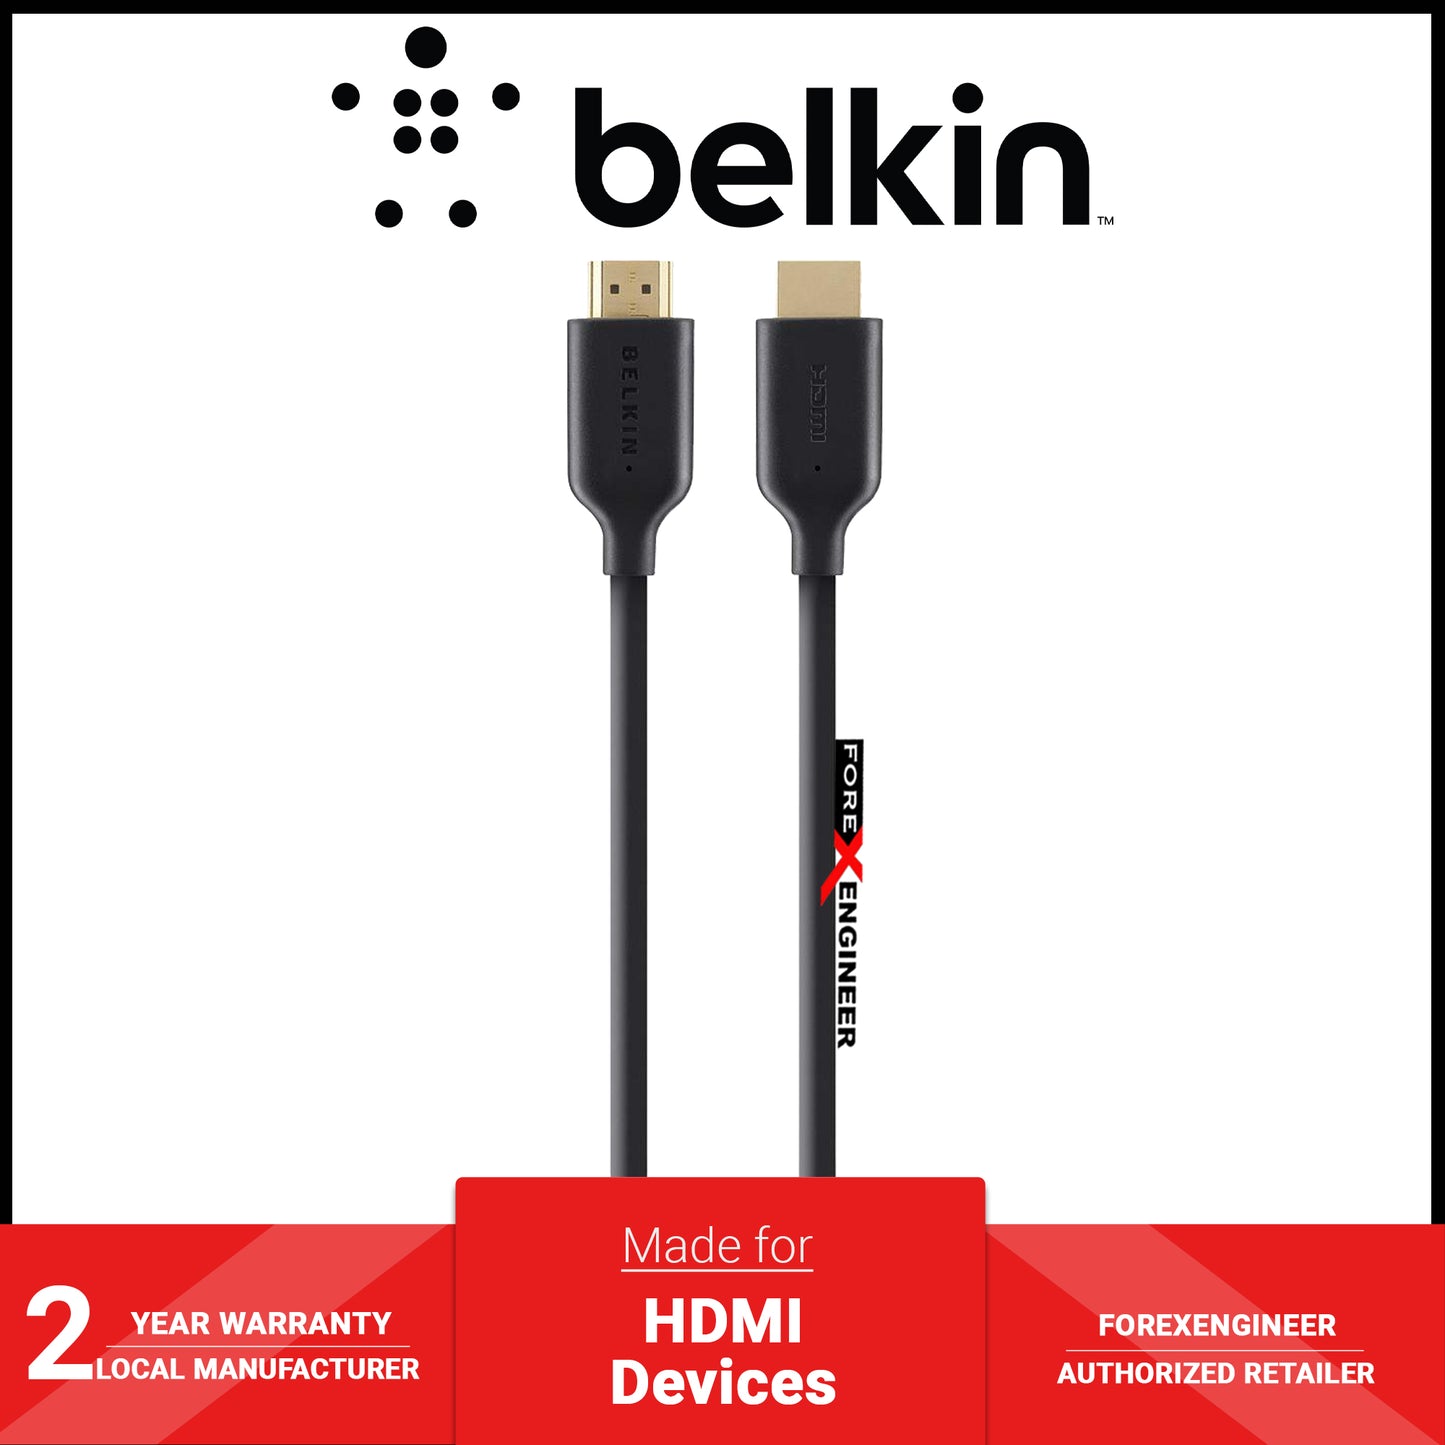 BELKIN High Speed HDMI Cable with Ethernet and 4K Supported ( 1 Meter ) - HDMI-to-HDMI - Black (Barcode: 745883713059 )